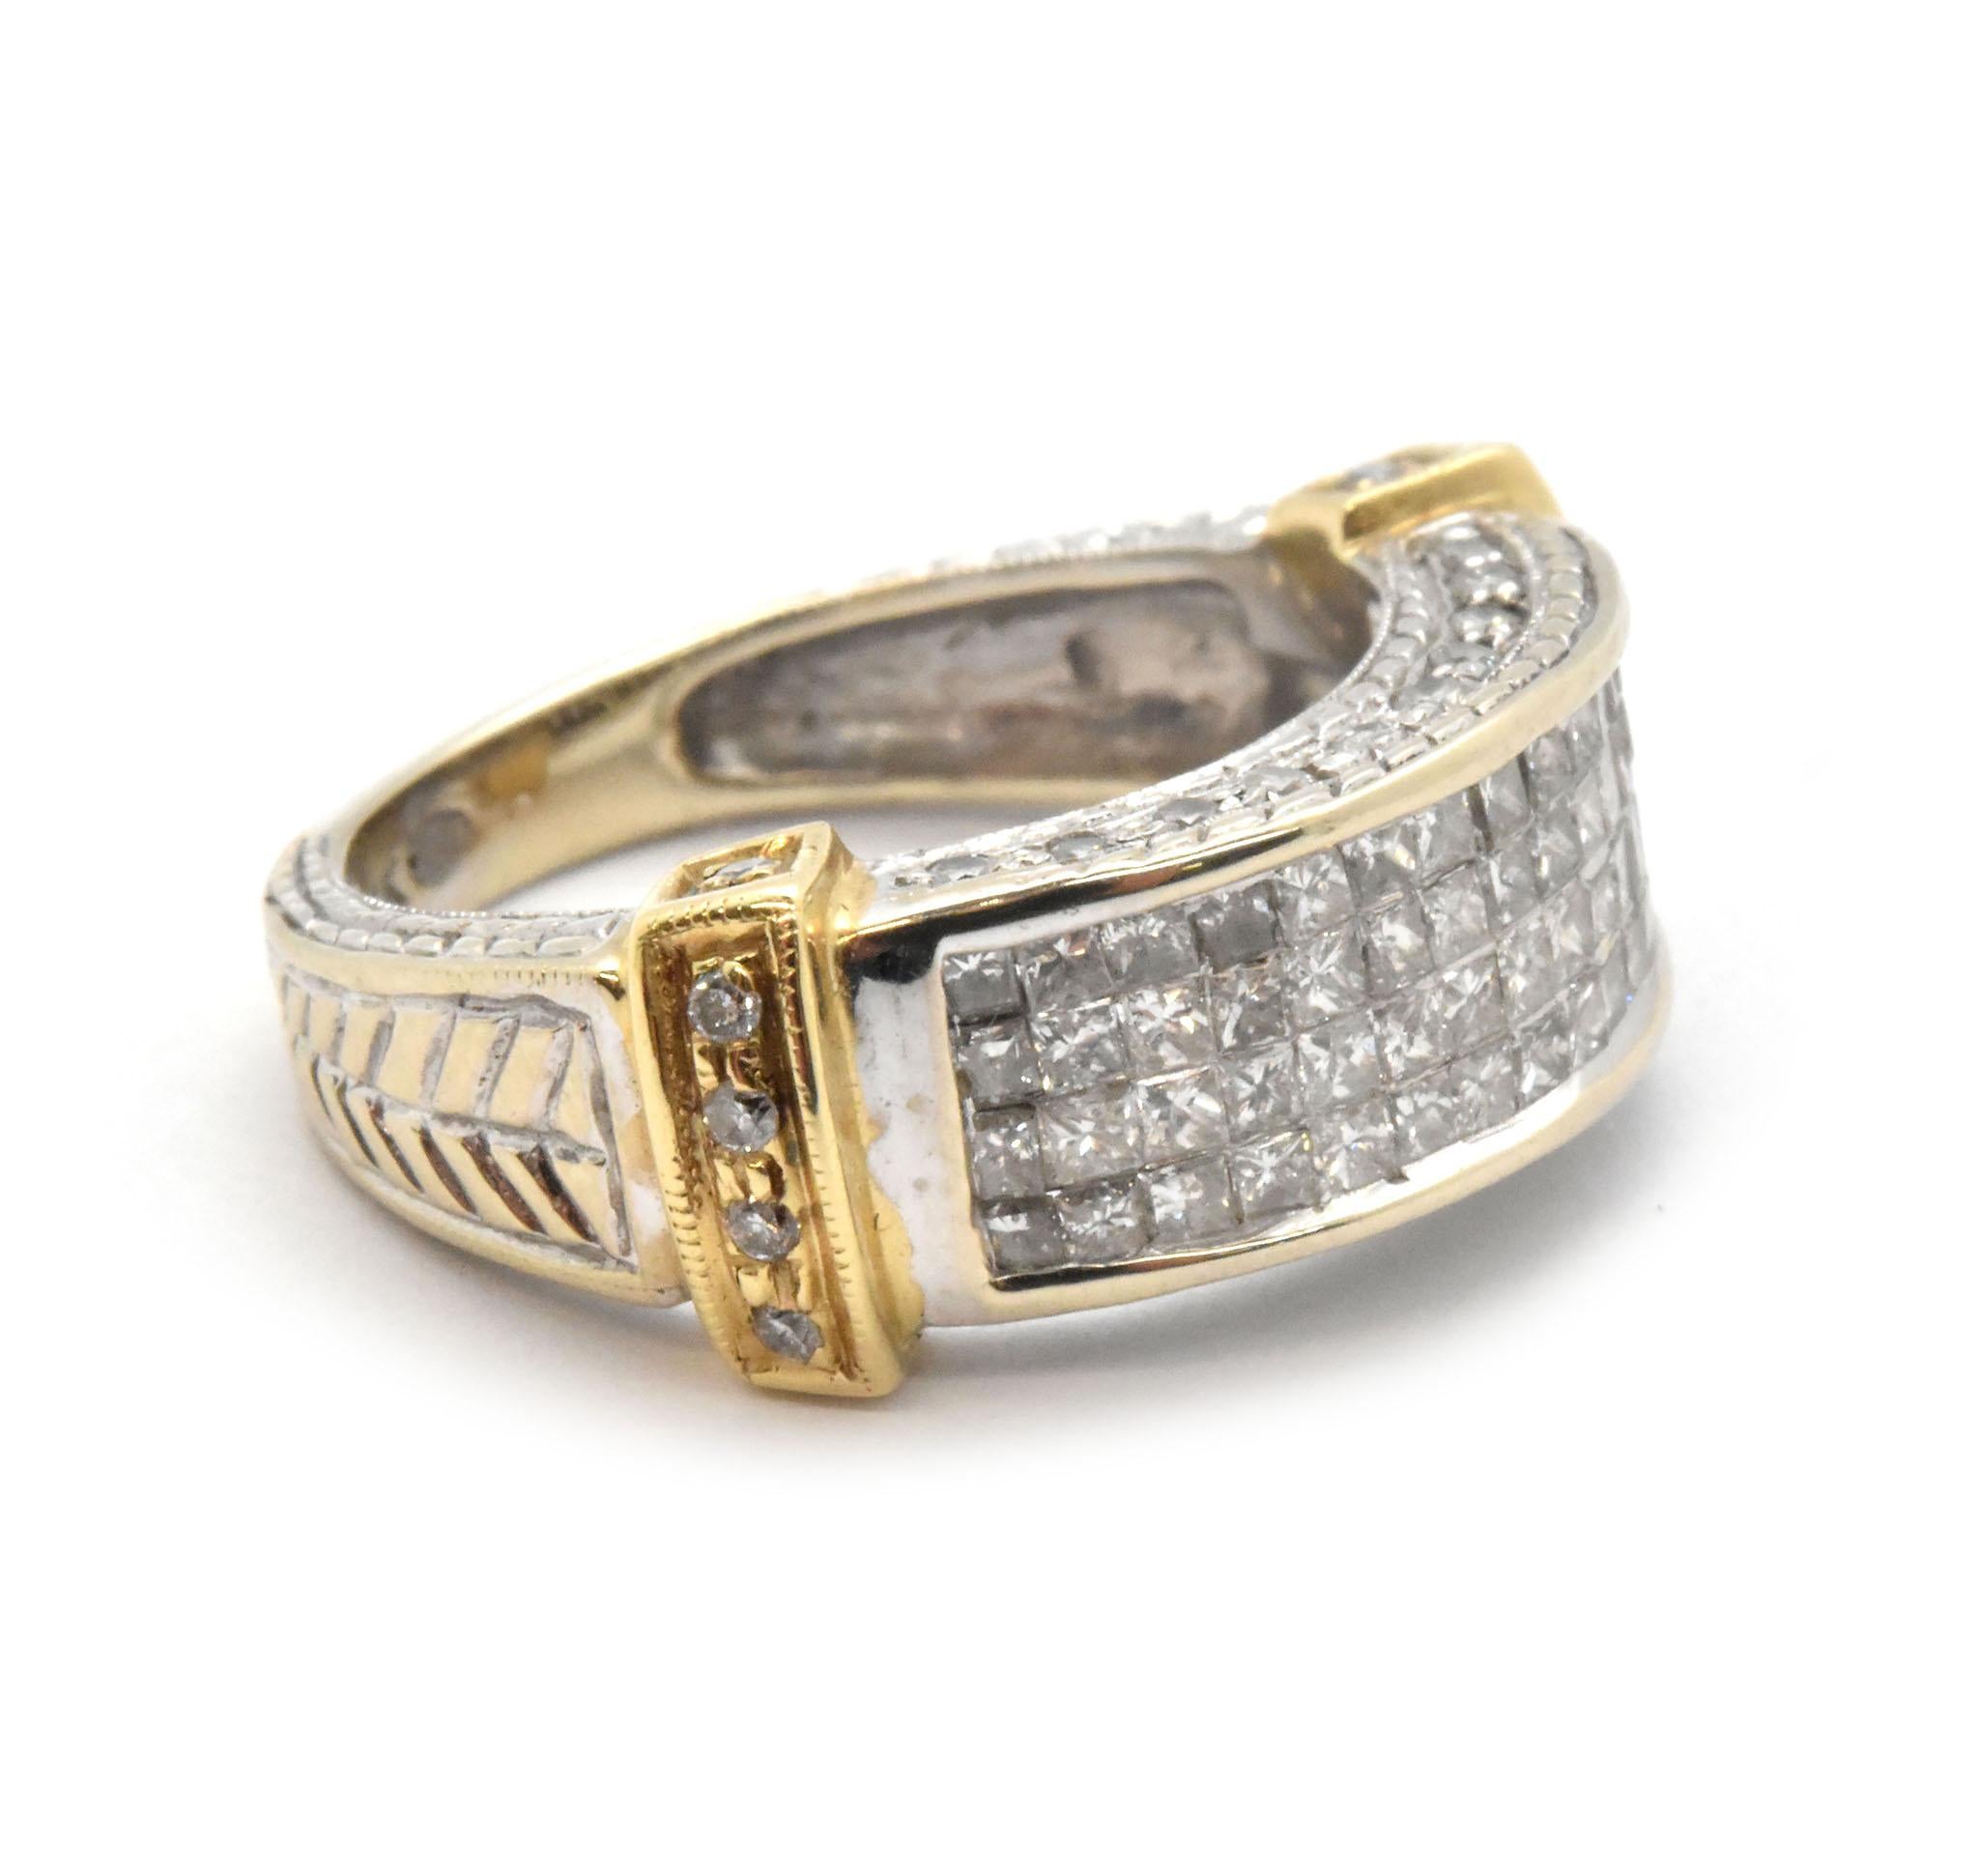 This ring is made in 14k white gold with 14k yellow gold accents. It features 4 rows of invisible-set princess-cut diamonds for a total weight of 1.28 carats. The diamonds are graded H in color and VS-SI in clarity. The ring measures 7mm wide, and